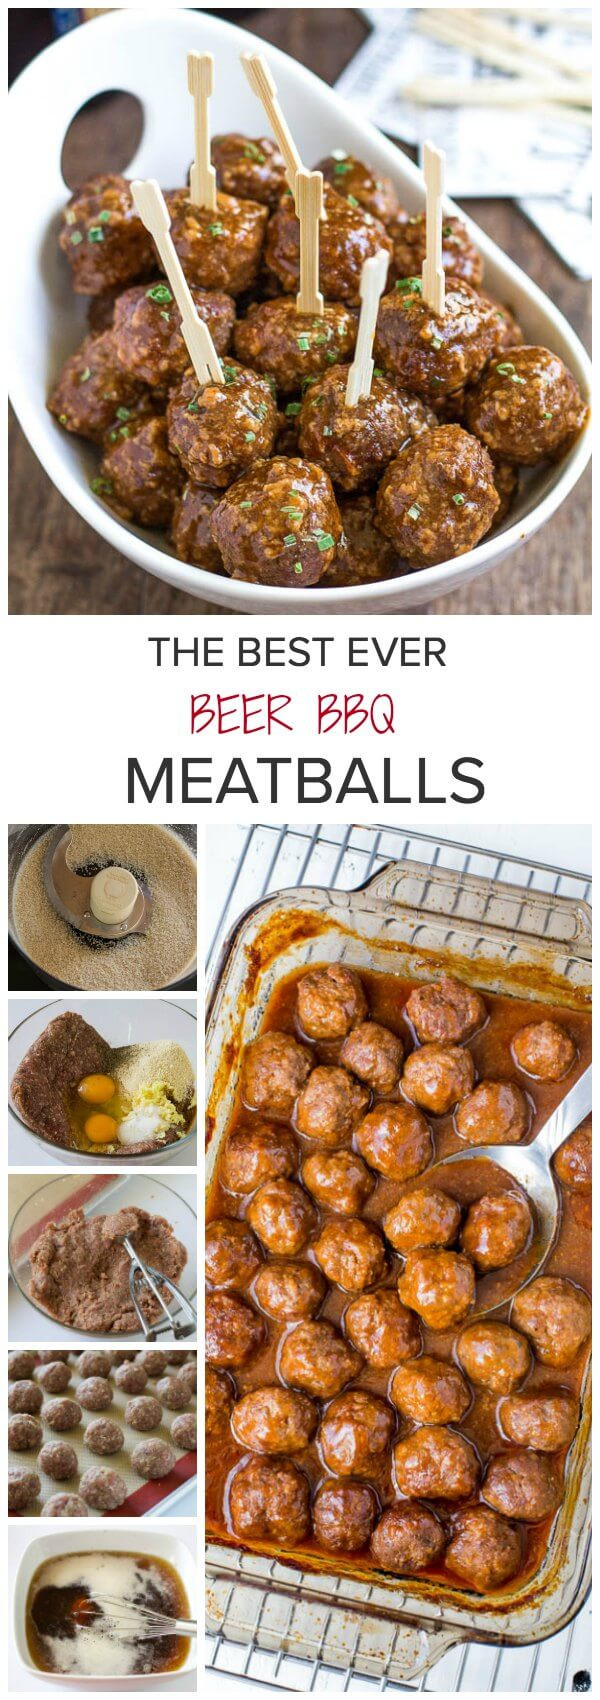 Meatballs With Jelly And Bbq Sauce
 Party Ready Beer BBQ Meatballs Sweet & Savory by Shinee